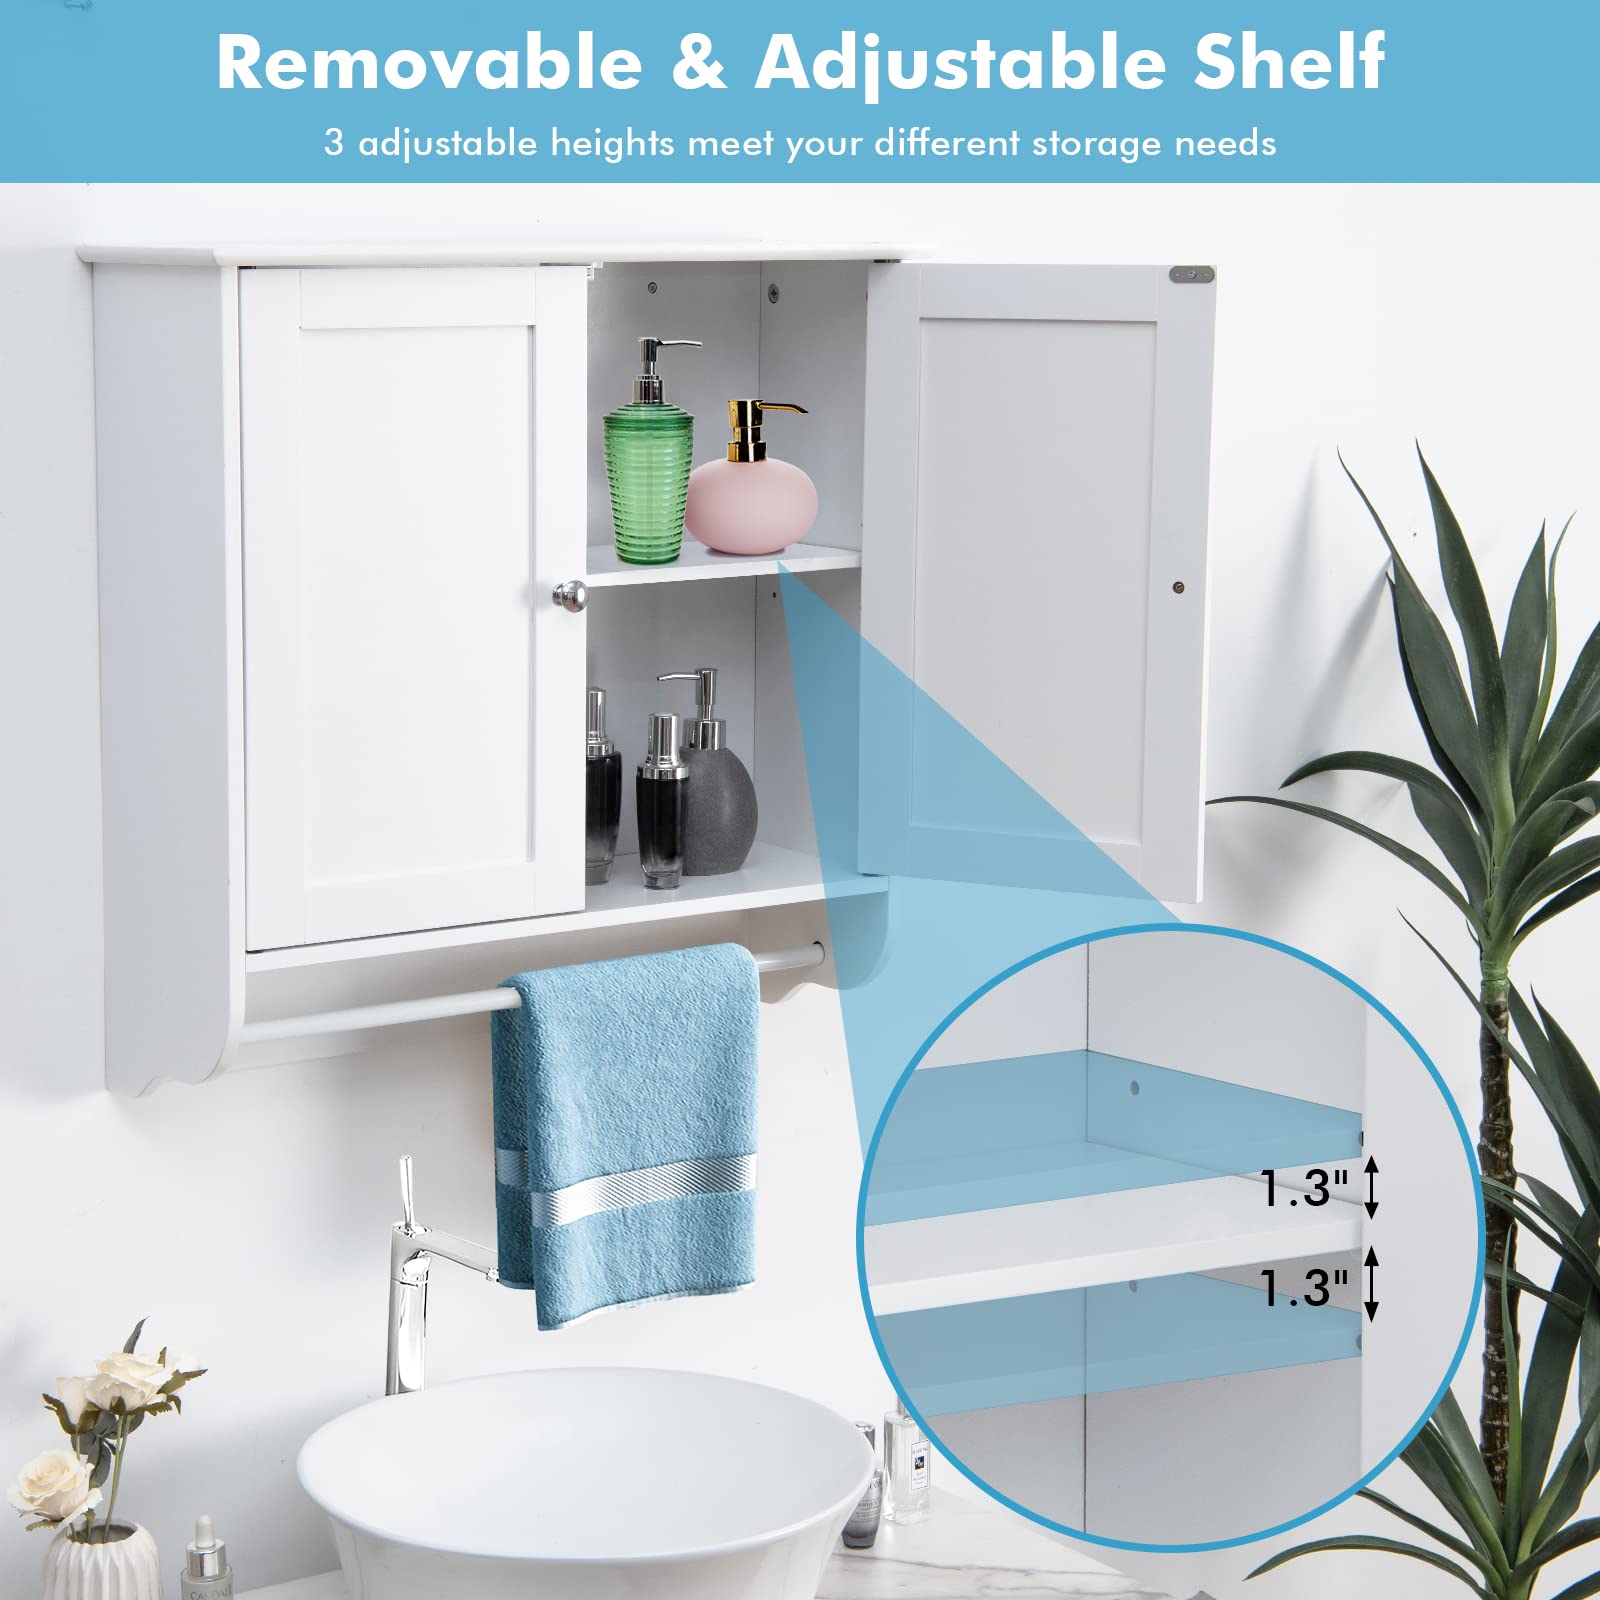 Bathroom Cabinet Wall Mounted - Over The Toilet Medicine Cabinet with Double Doors - Giantex